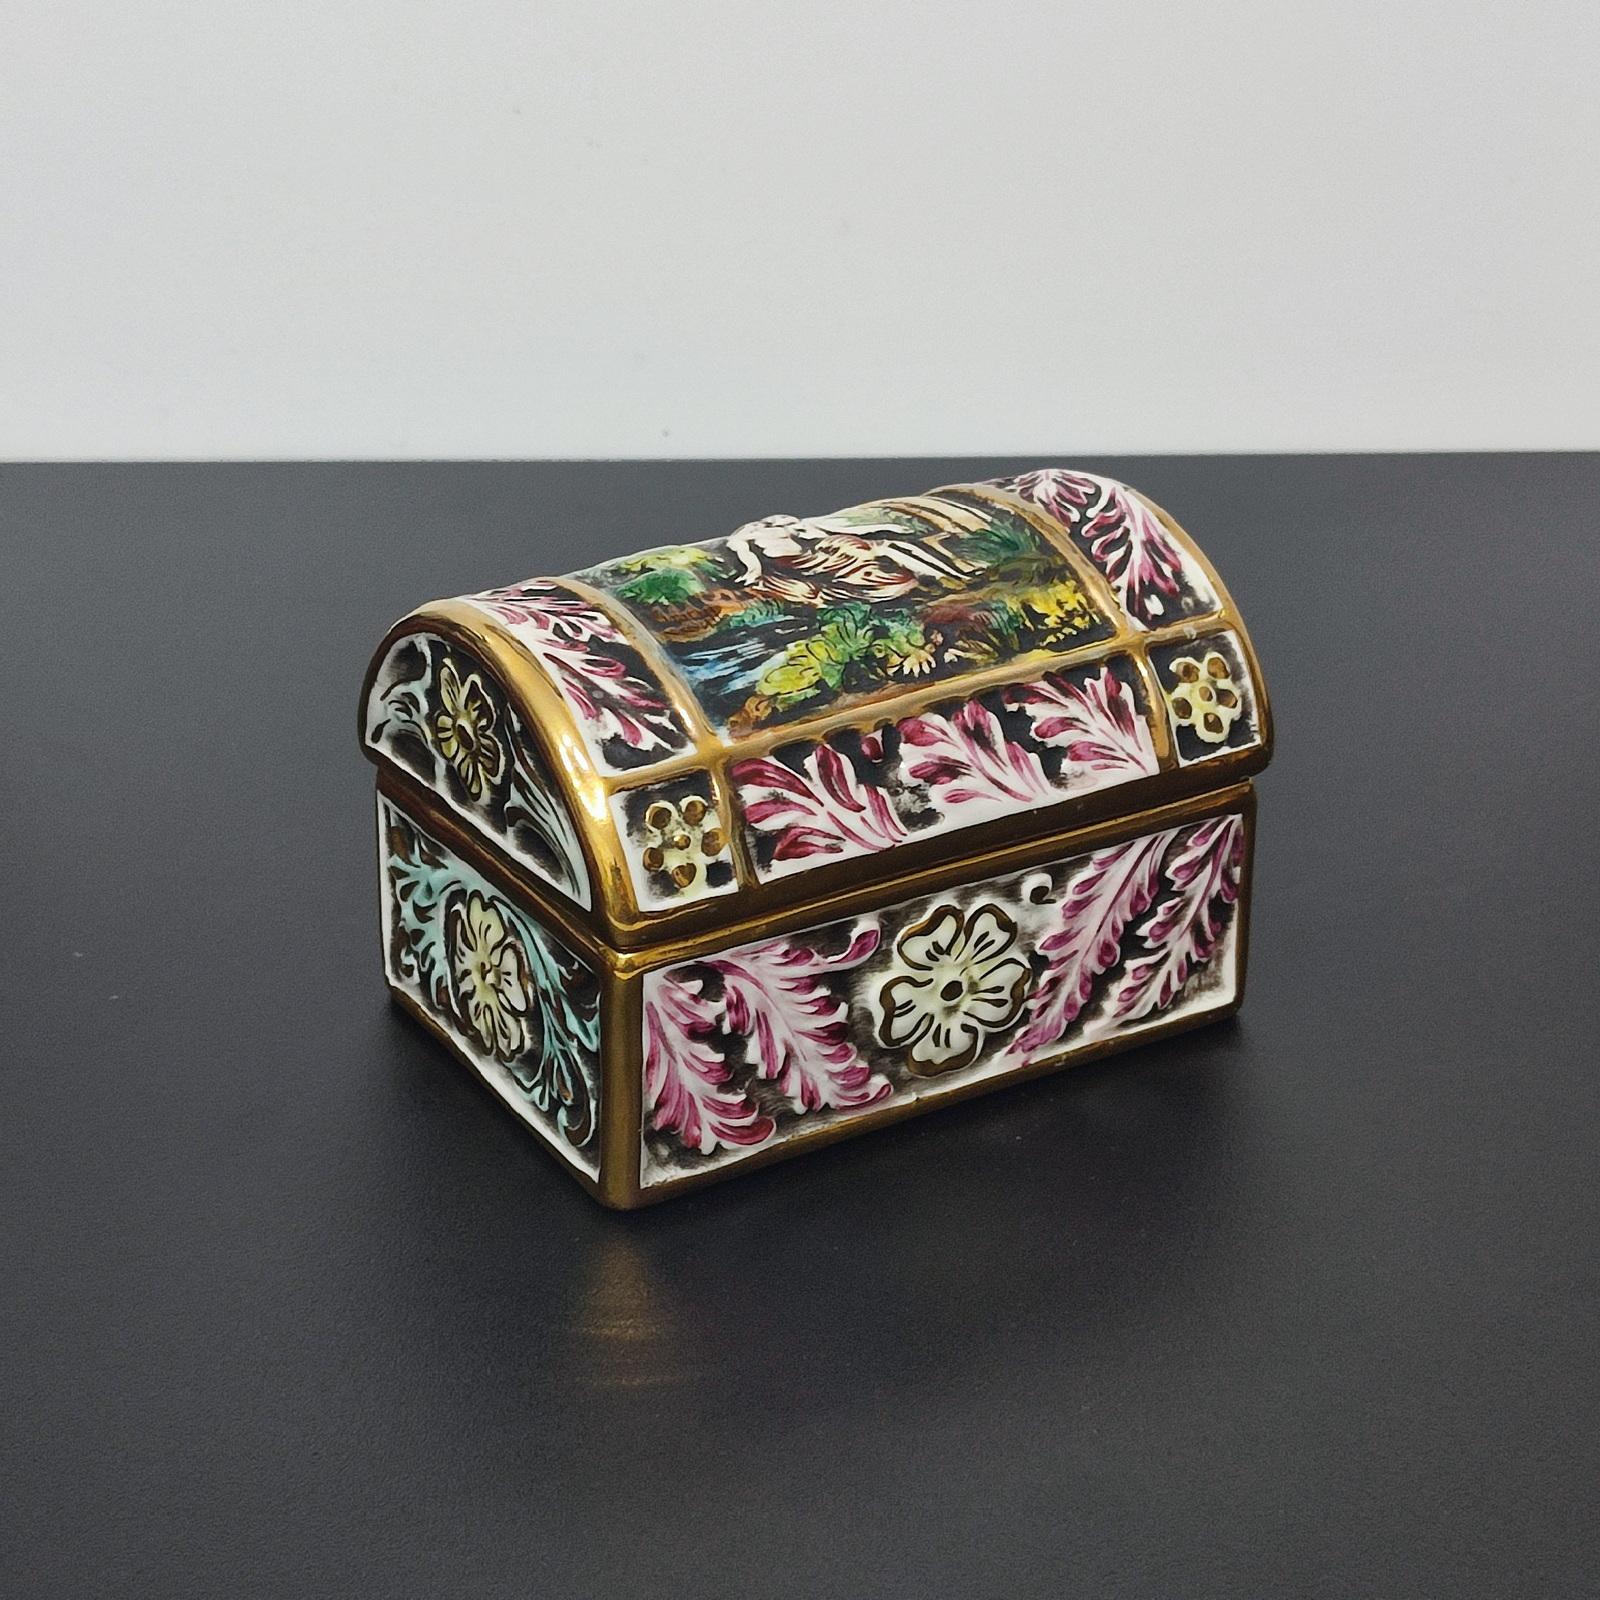 Capodimonte Porcelain Chest, Jewelry Box, Italy Mid 20th Century - FREE SHIPPING For Sale 3